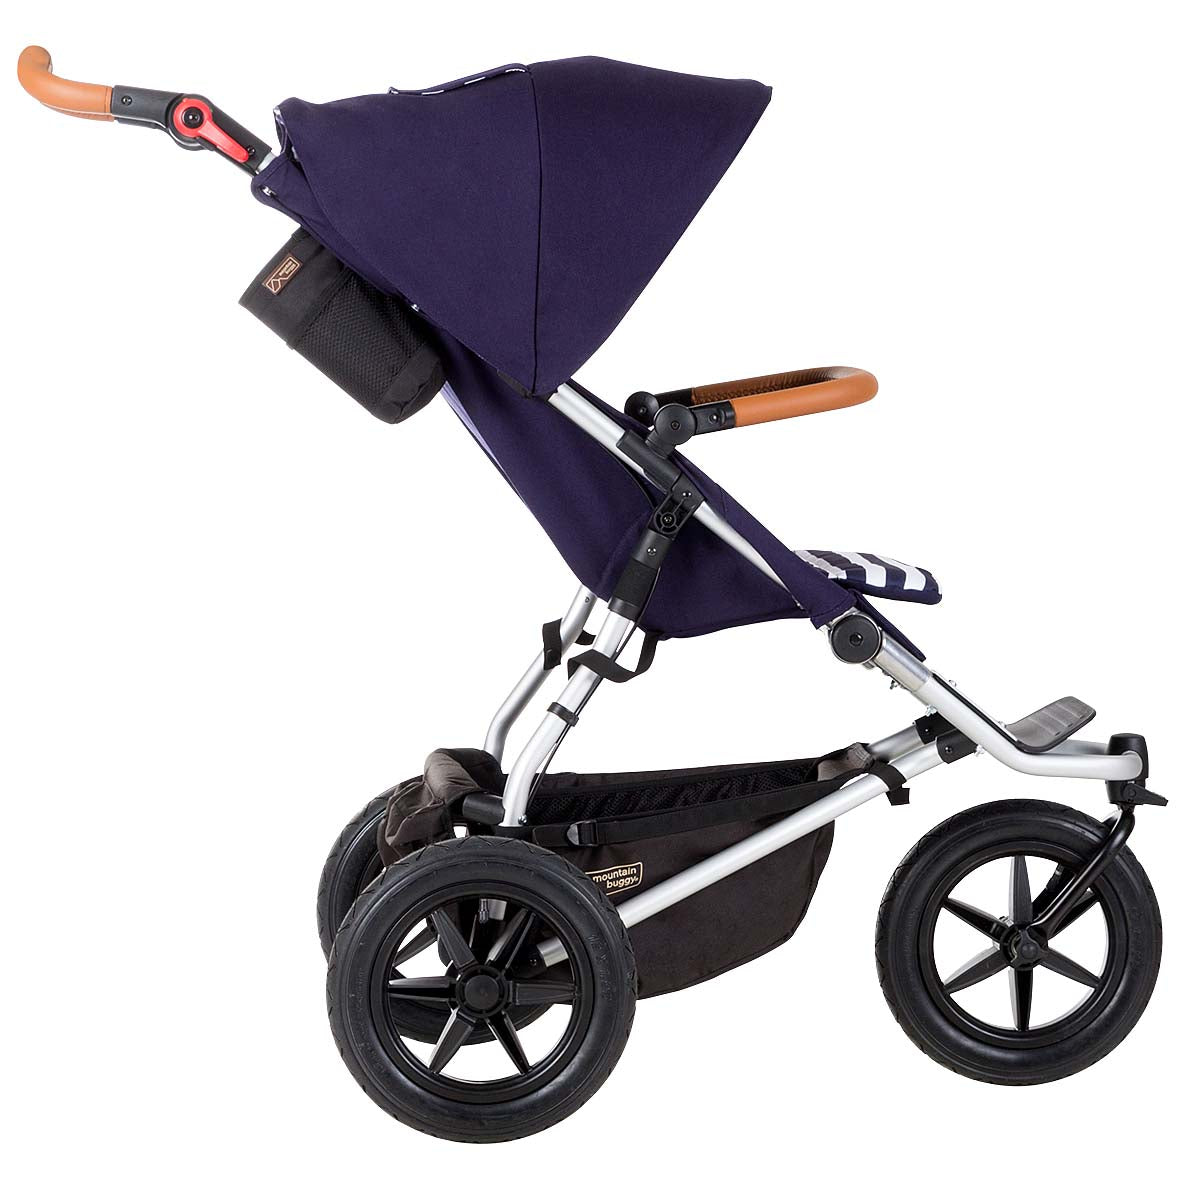 mountain buggy luxury collection